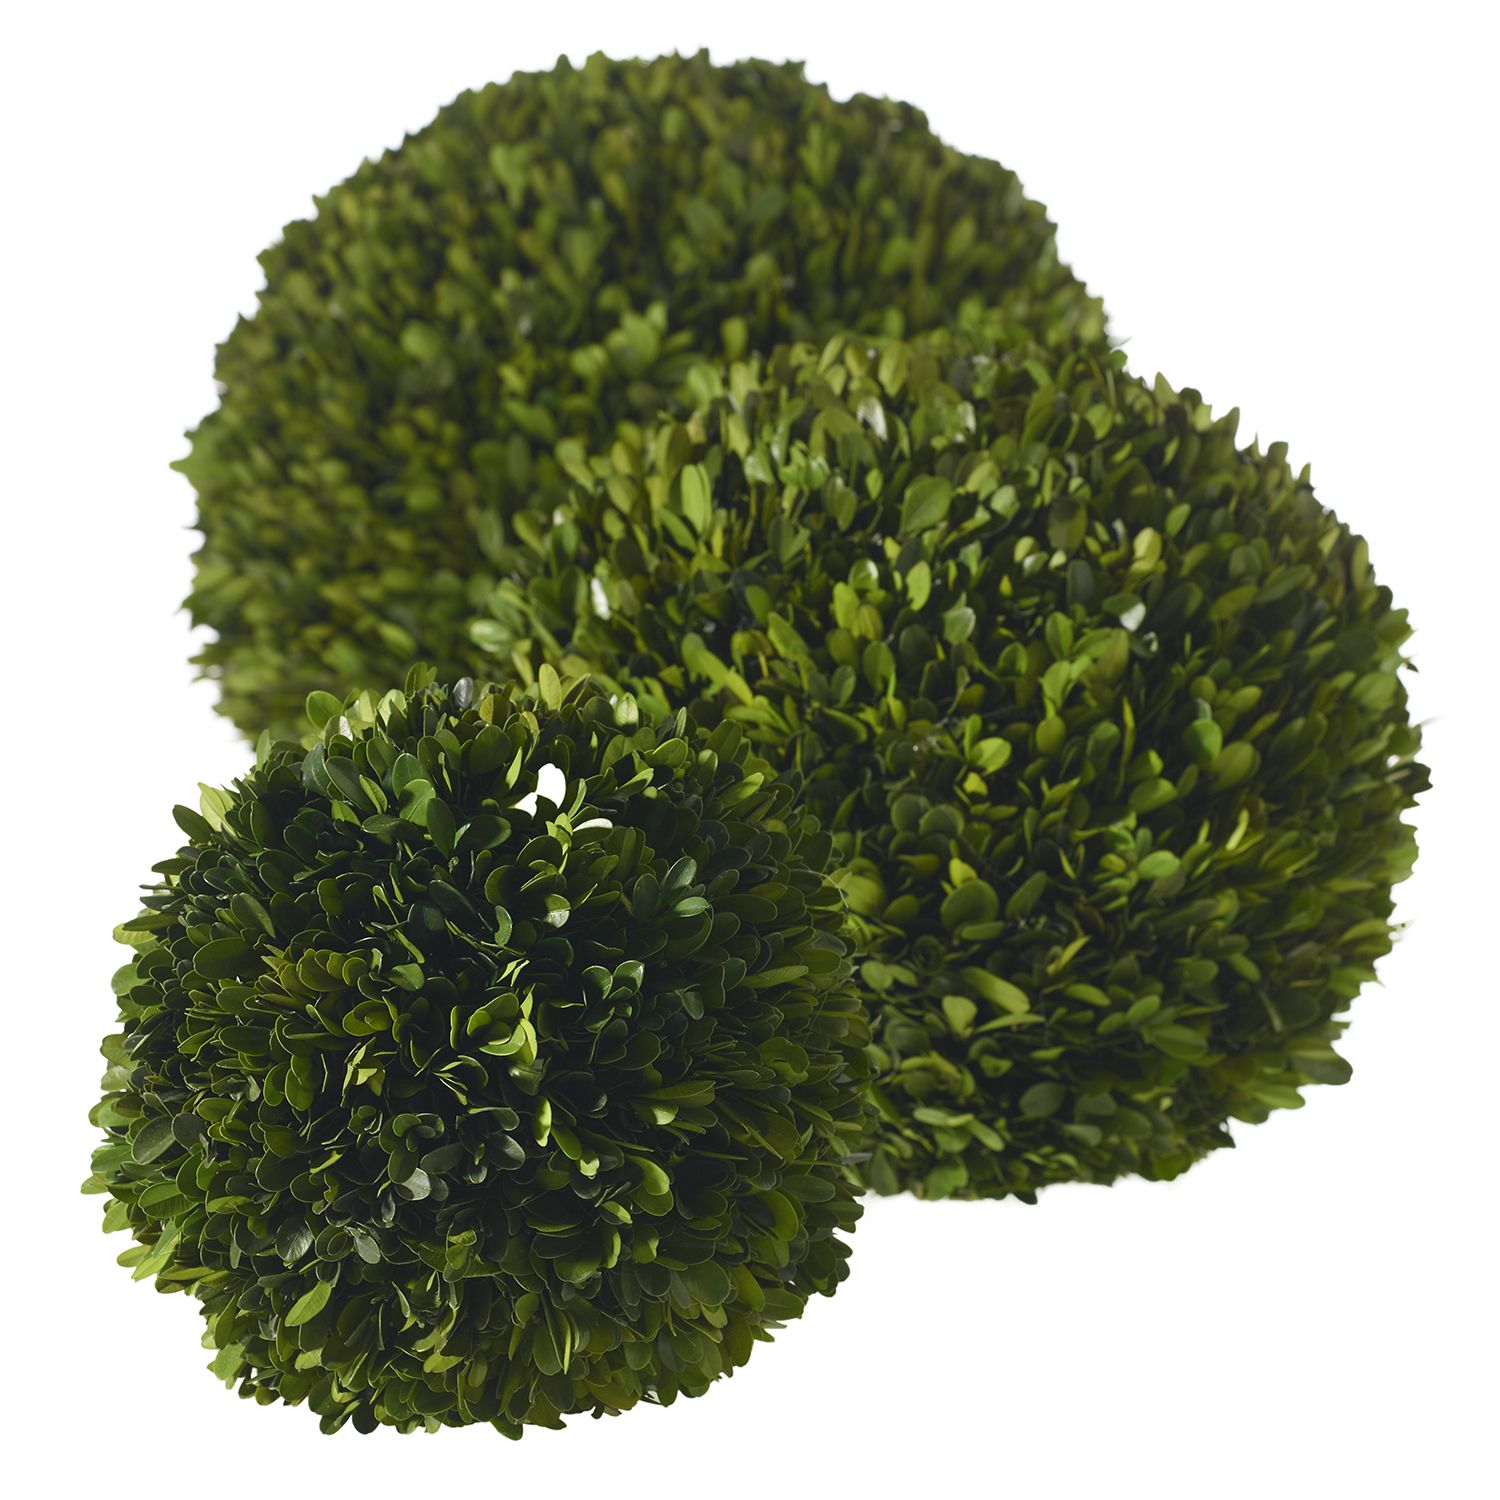 Three Accent Decor Preserved Boxwood Spheres painstakingly assembled on a white background.